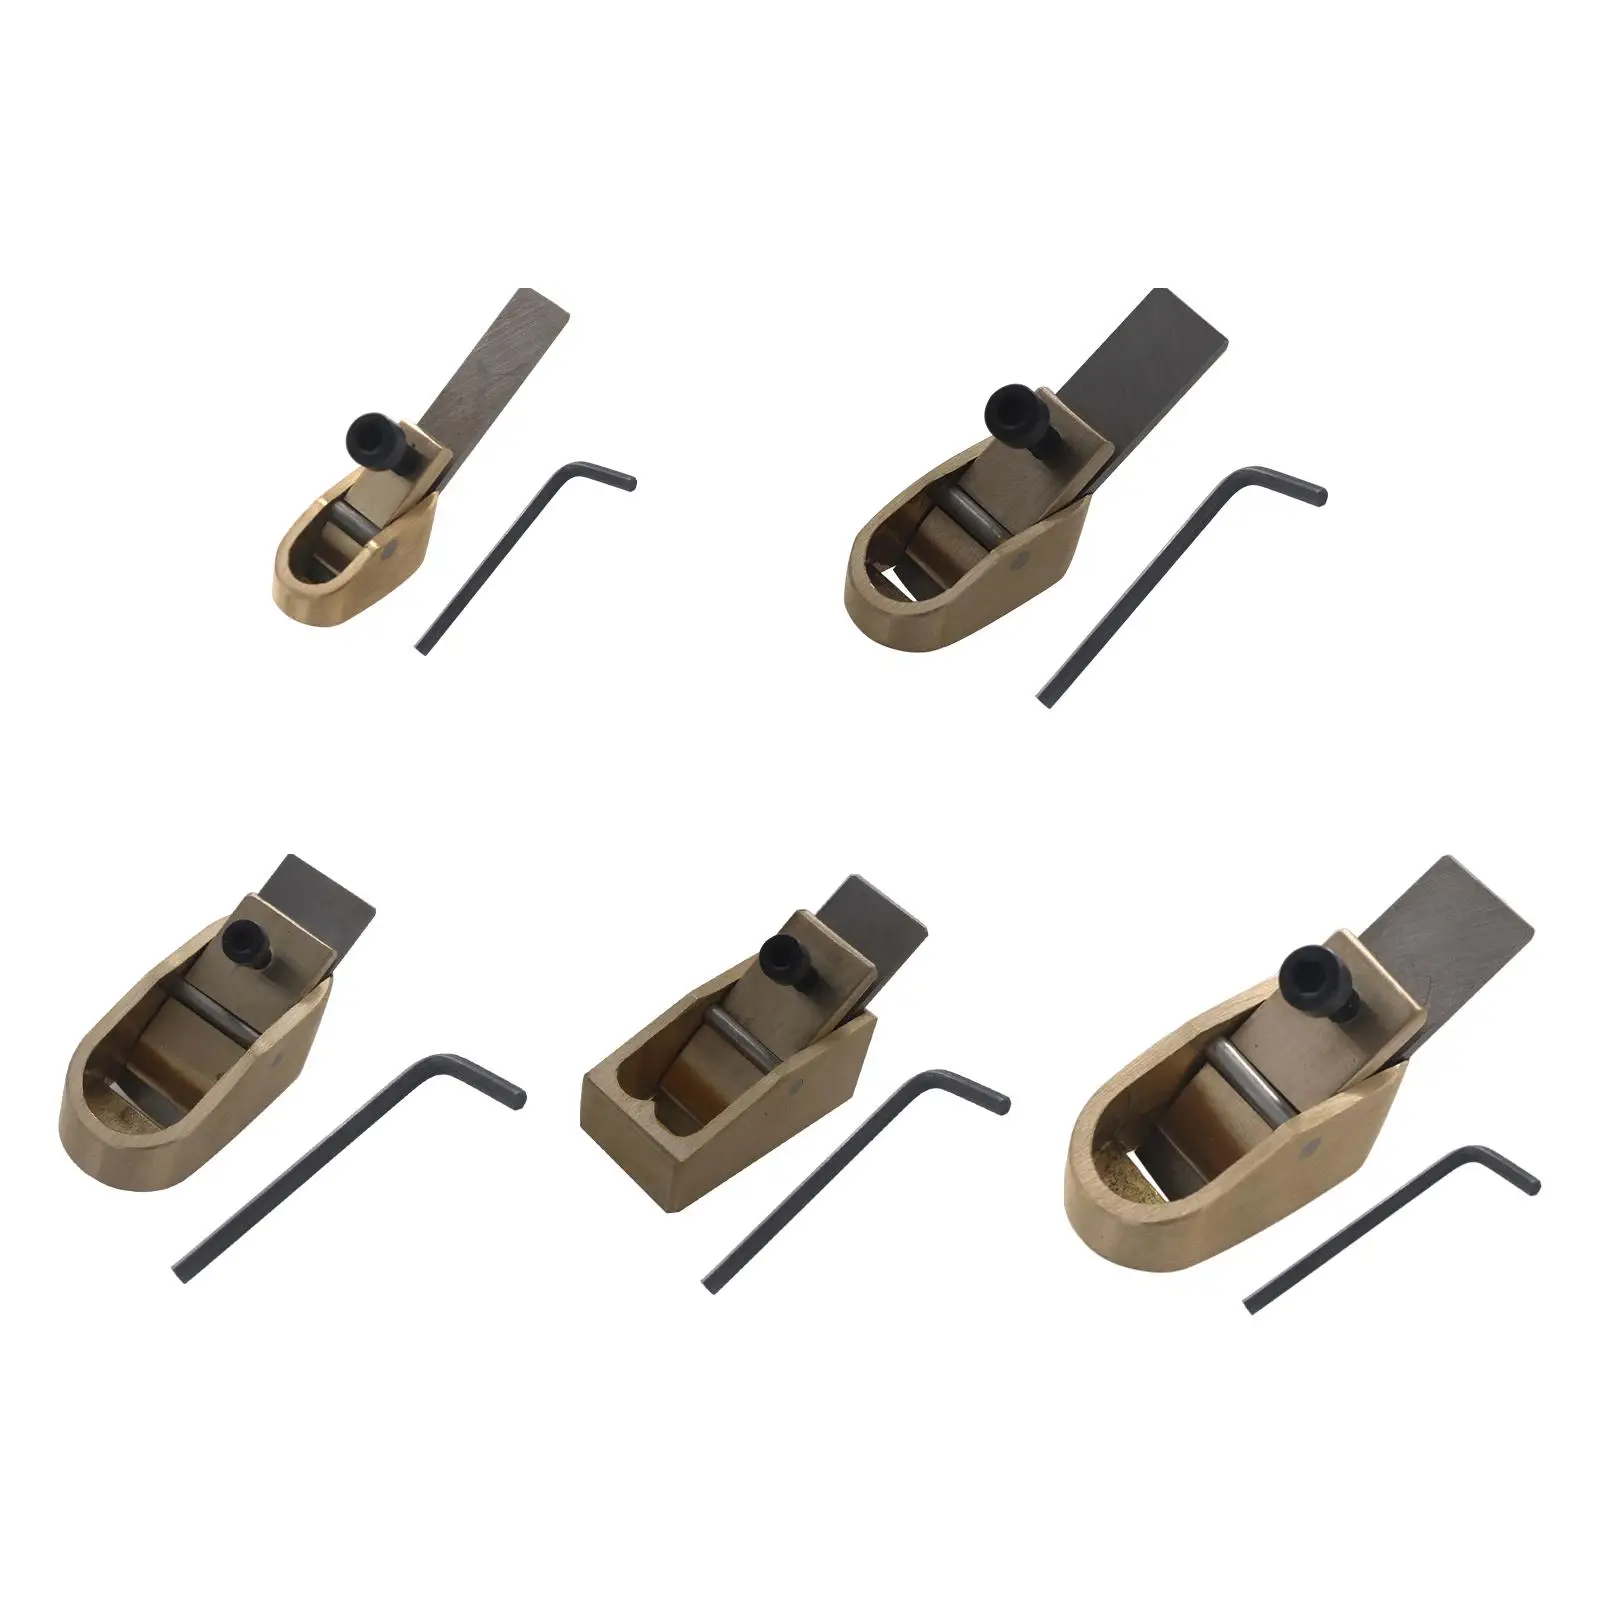 Violin Thumb Planer Repair Brass Professional Luthier Tool DIY Violin Making Woodworking Thumb Planes Smooth Surface Accesssory